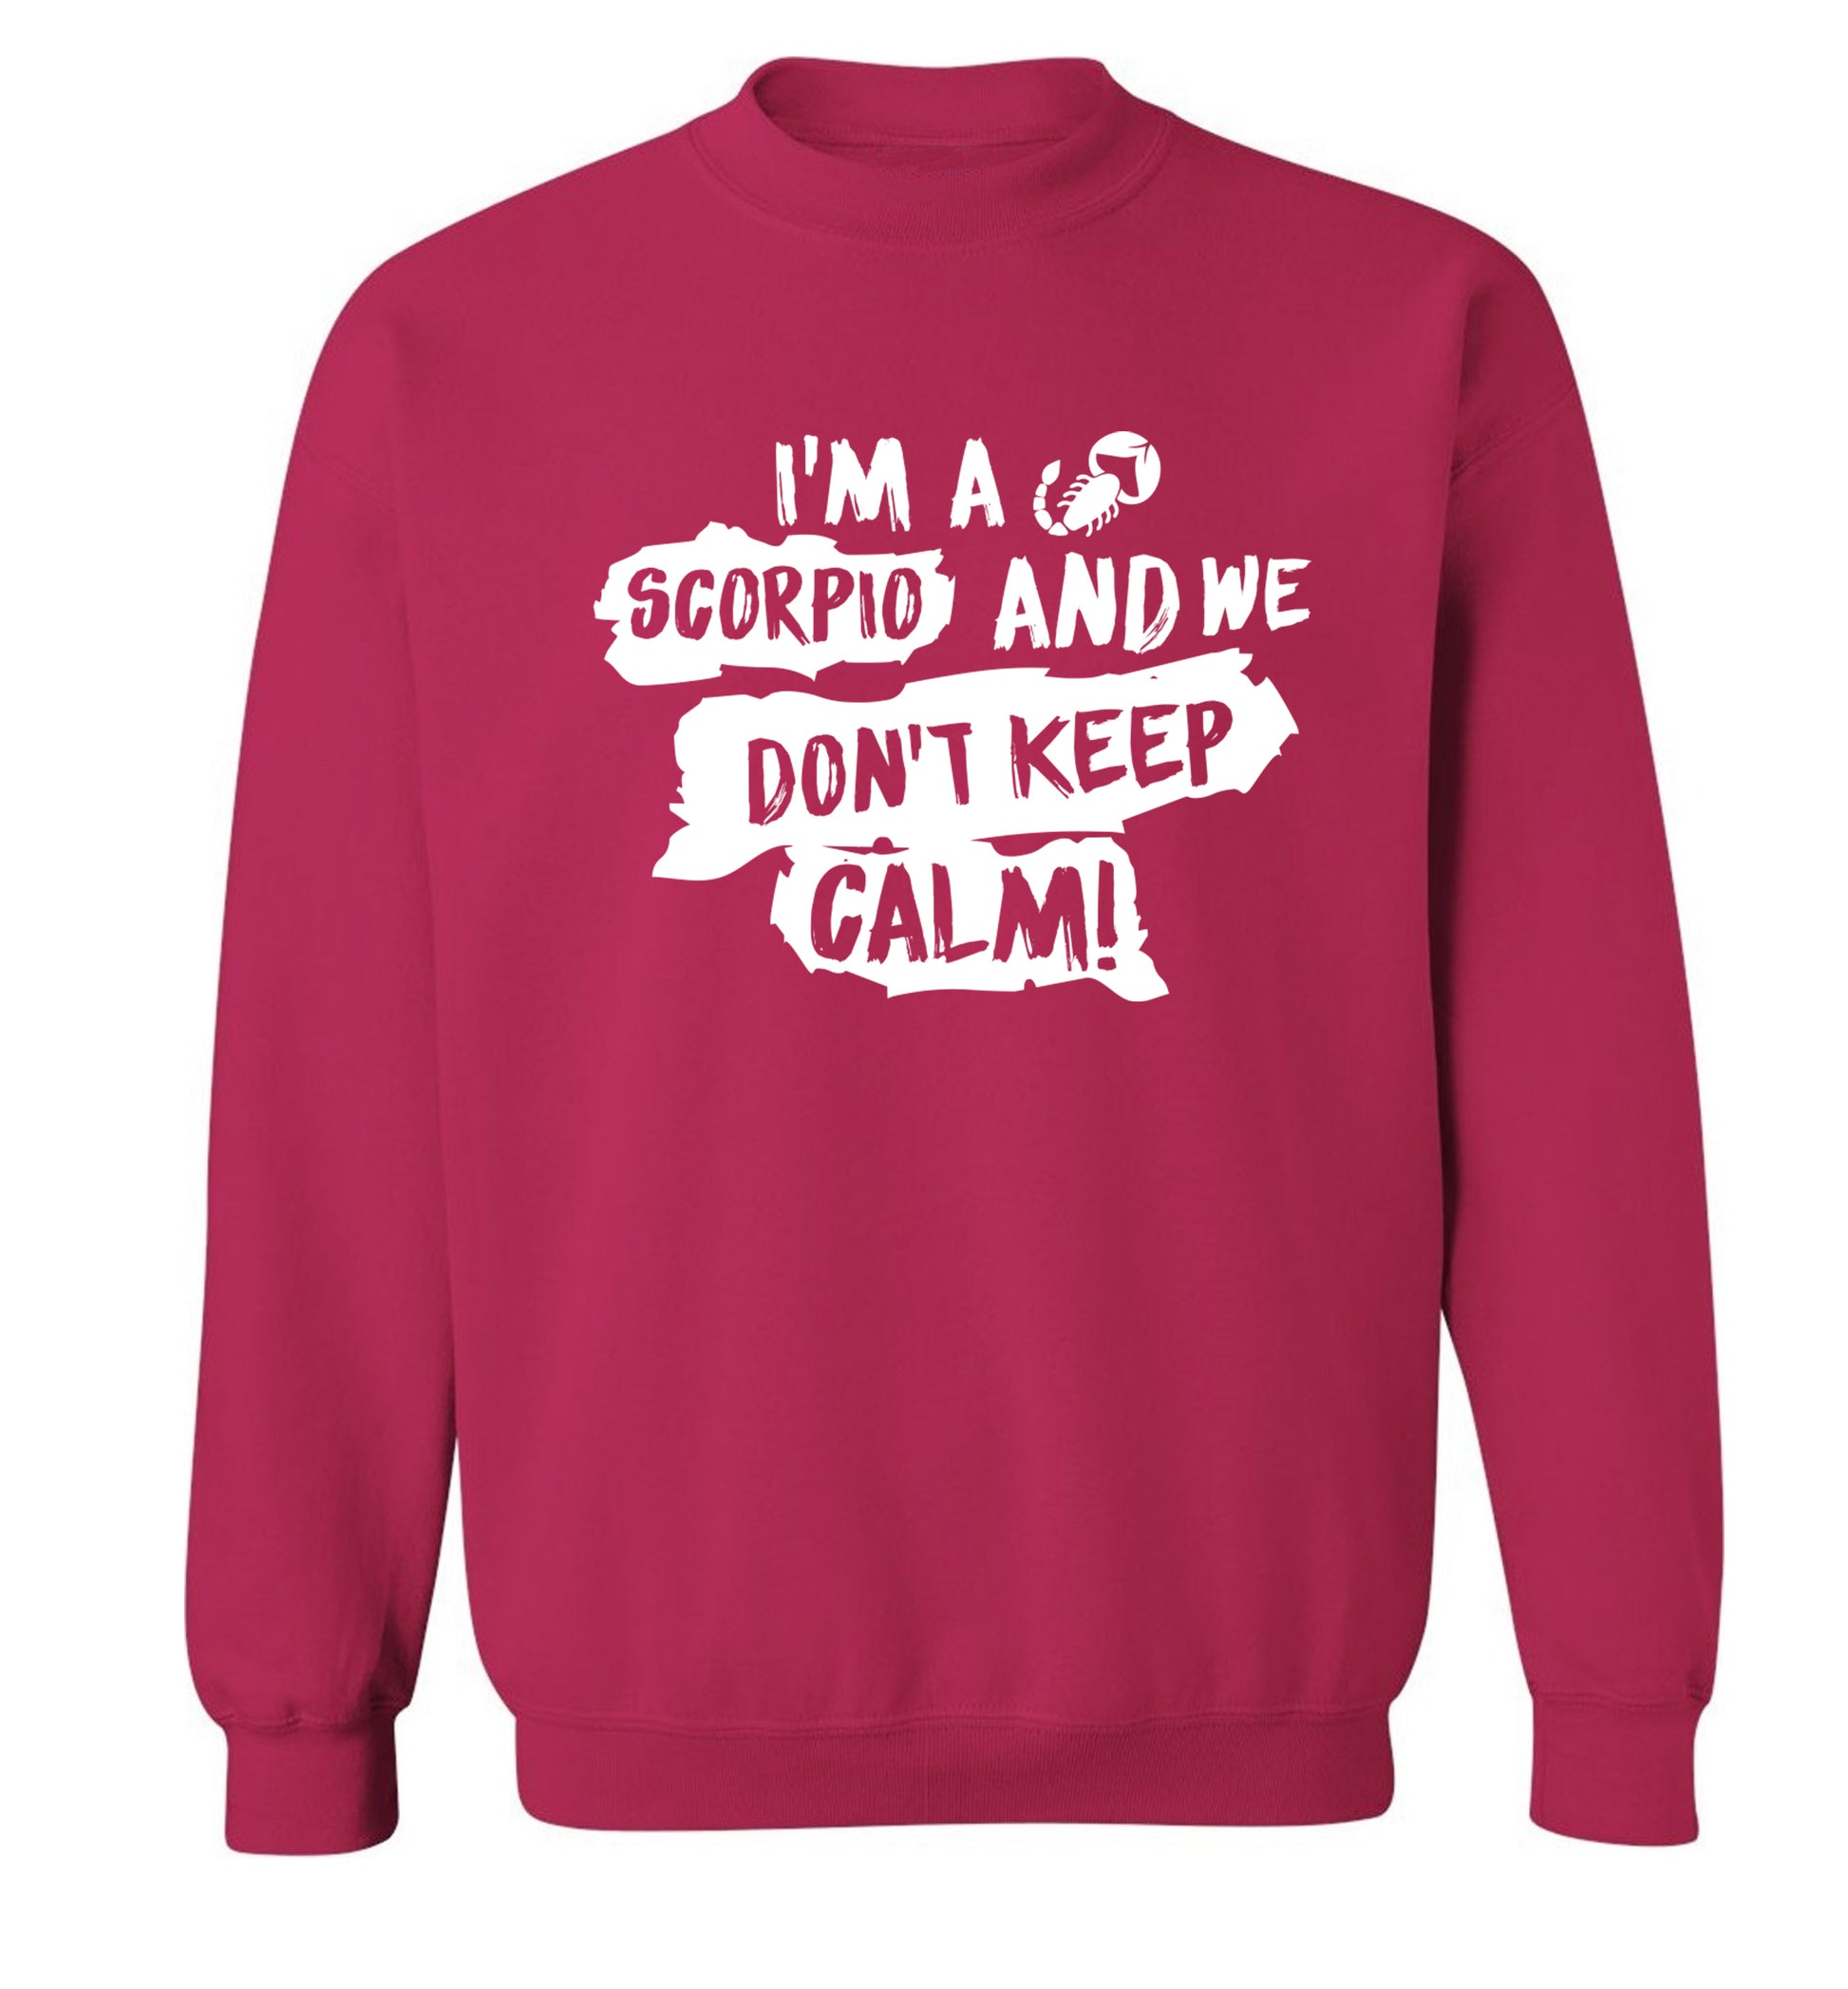 I'm a scorpio and we don't keep calm Adult's unisex pink Sweater 2XL